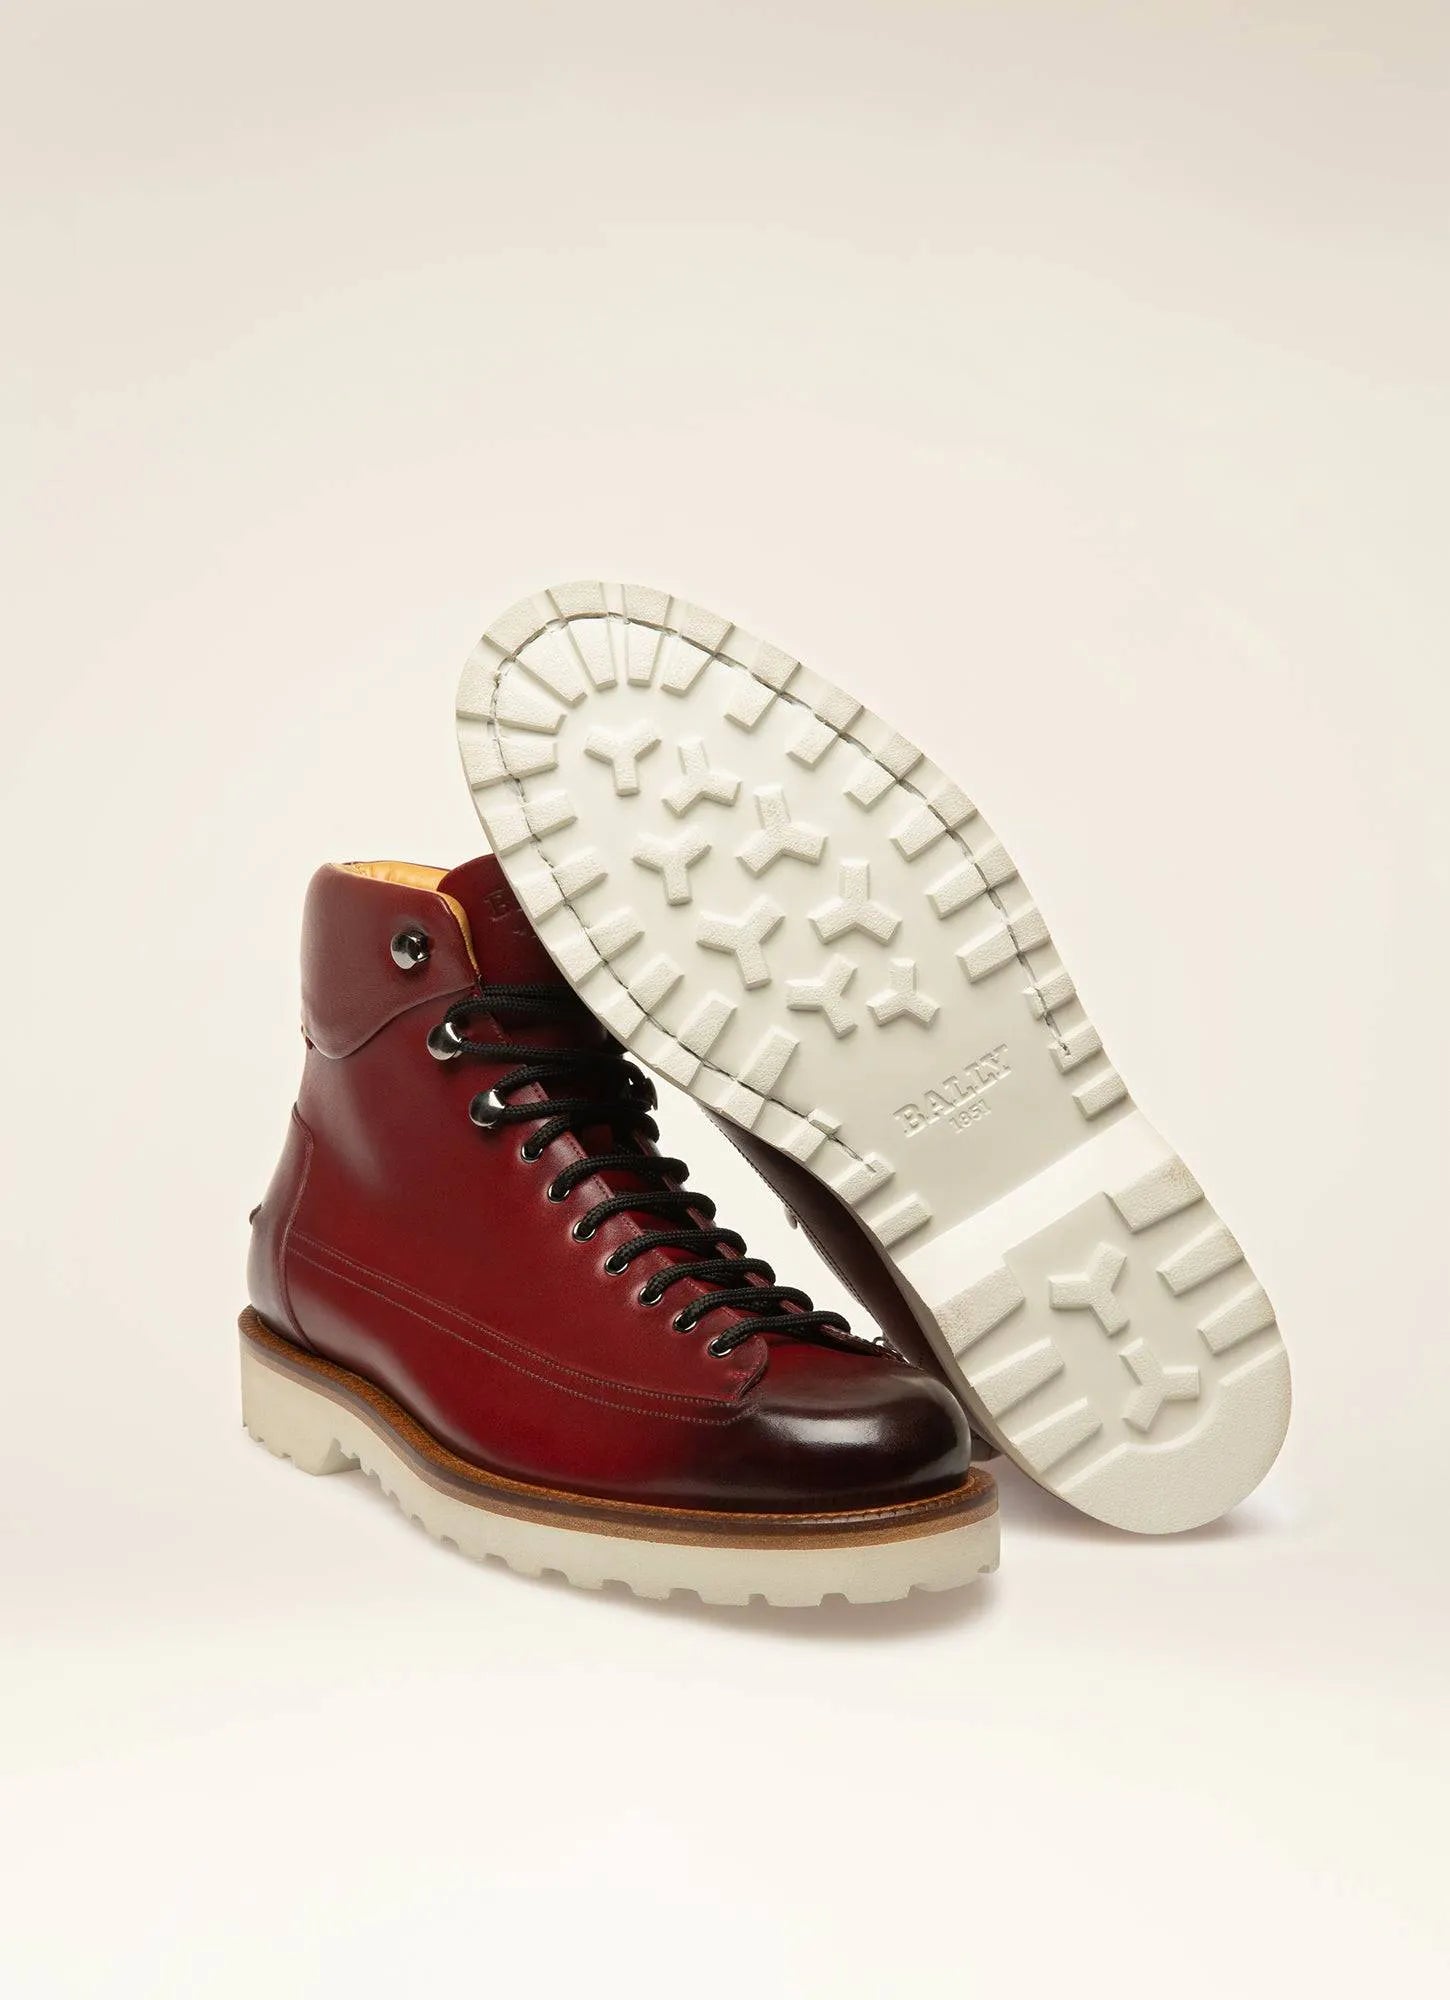 BALLY NOTTINGHAM Leather Boots In Heritage Red